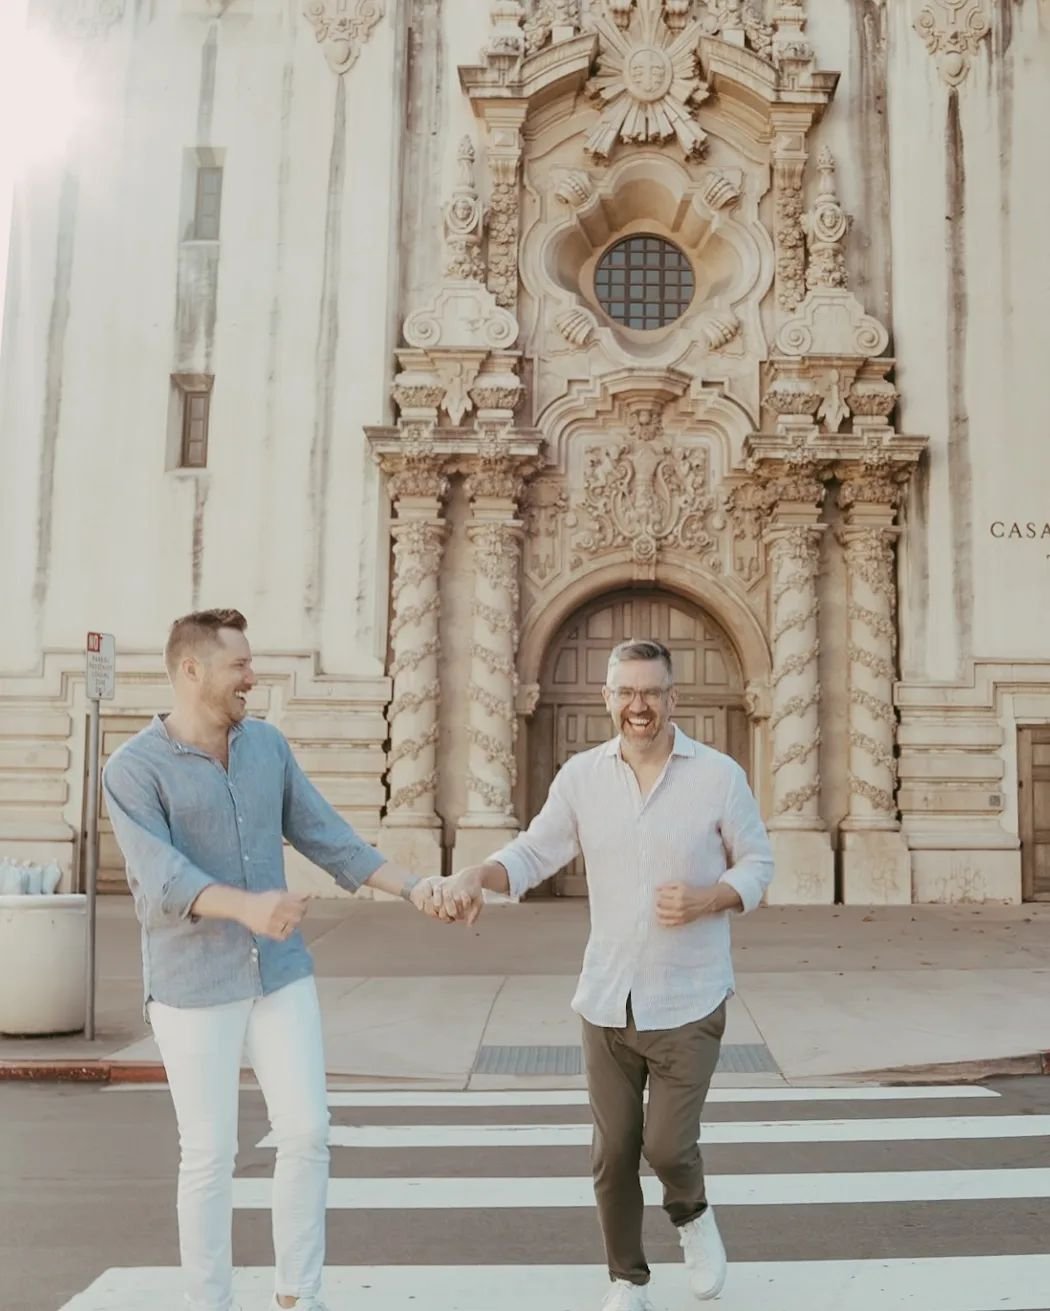 Austin + Adam are getting married this week, so it's about time to share their engagement session! I absolutely loved walking around Balboa Park with these two. It's an area that is very special to them, and we hit so many of the iconic landmarks tha